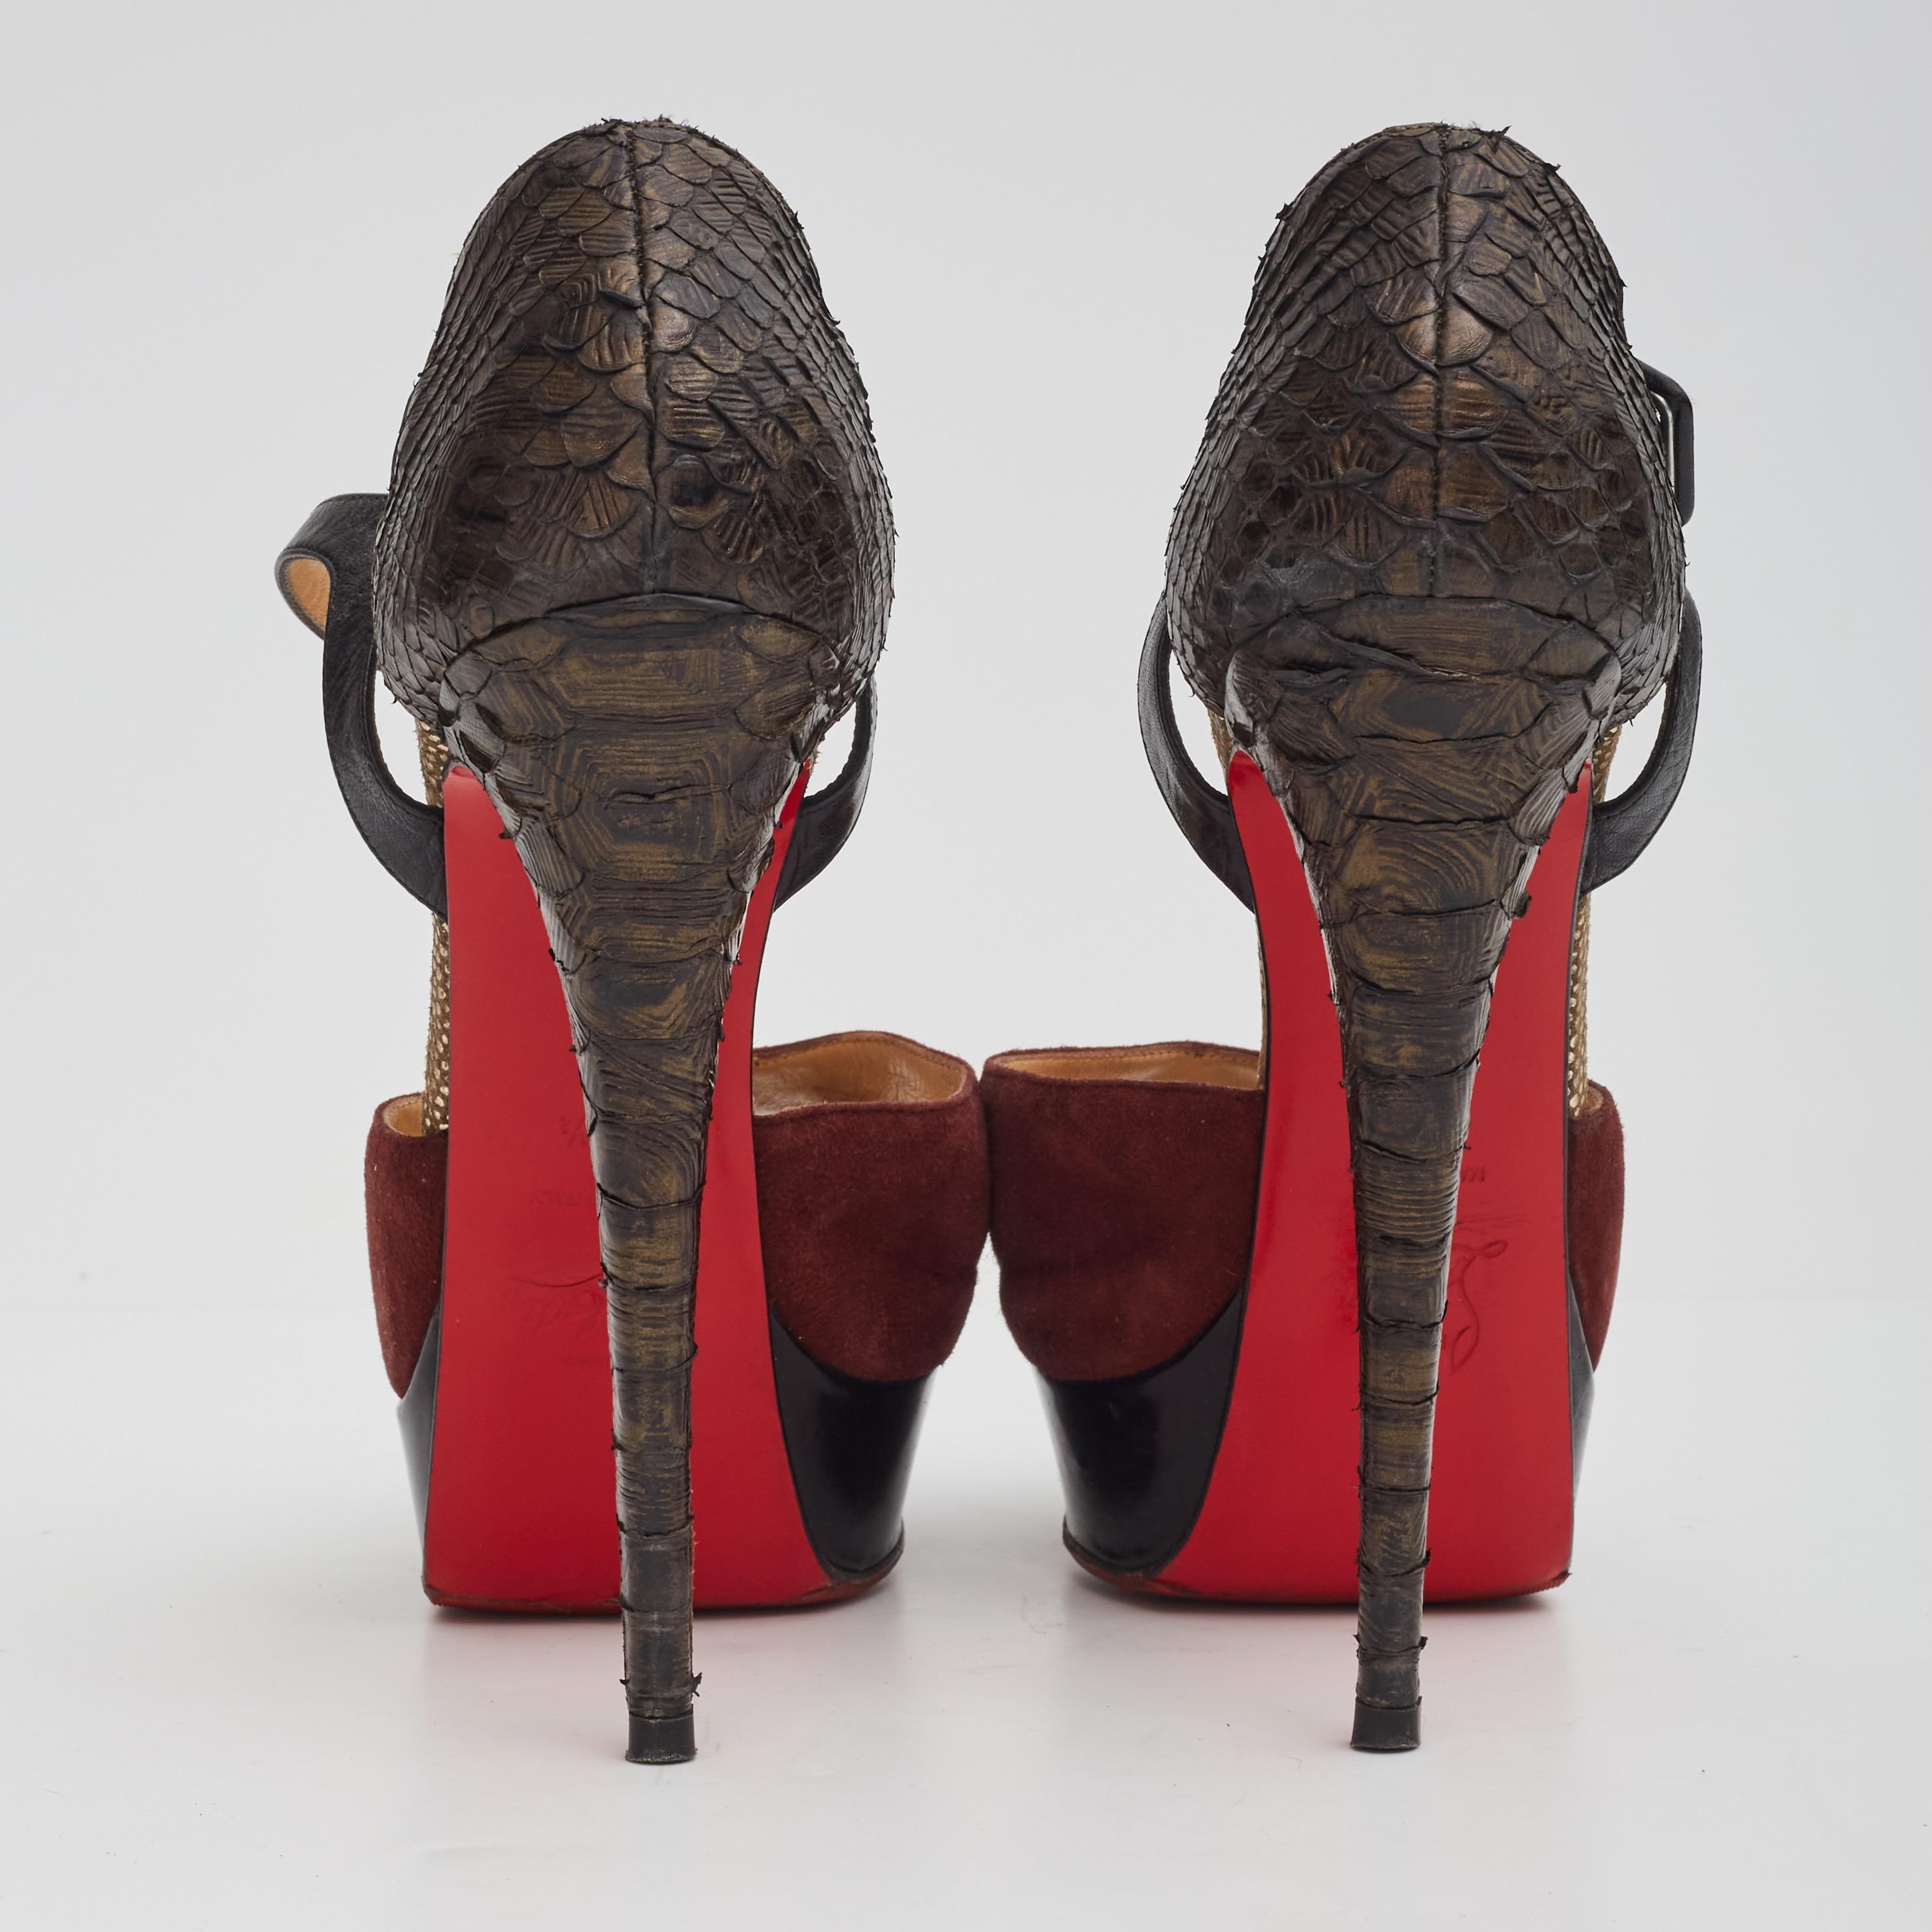 Christian Louboutin Burgundy Suede Snake Skin Peep Toe Platform Heel (US 8.5) In Good Condition For Sale In Montreal, Quebec